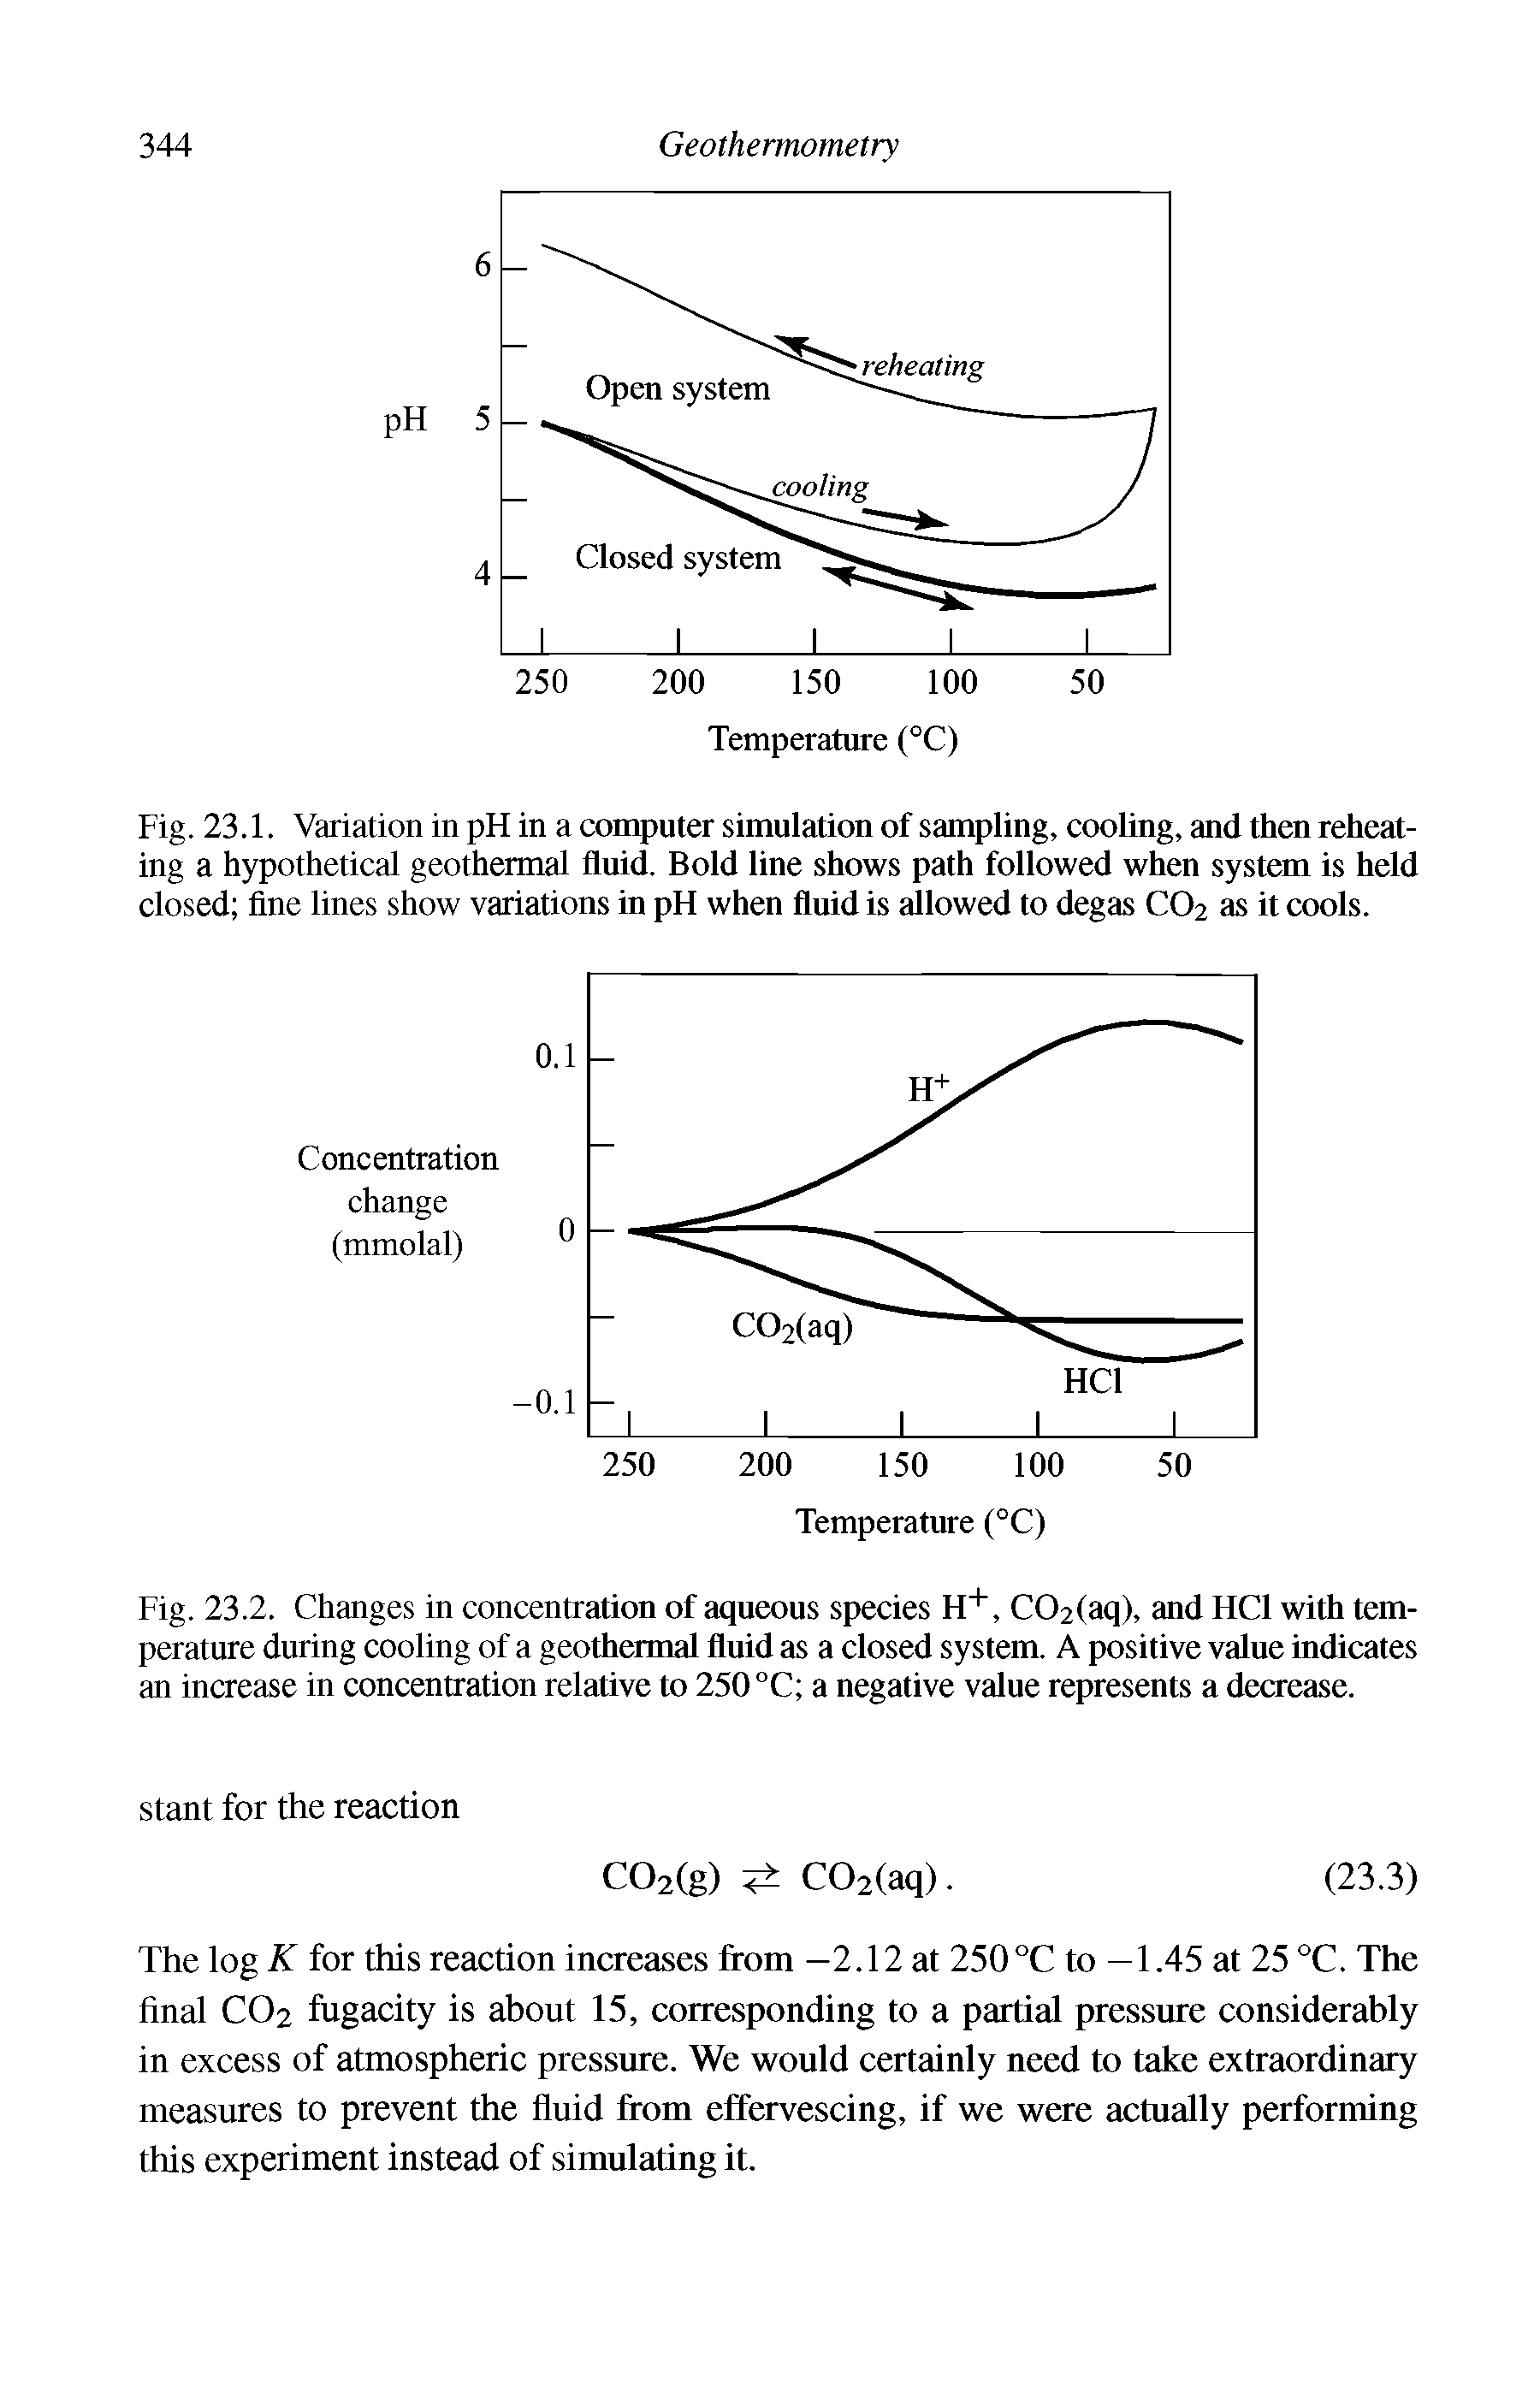 Fig. 23.1. Variation in pH in a computer simulation of sampling, cooling, and then reheating a hypothetical geothermal fluid. Bold line shows path followed when system is held closed fine lines show variations in pH when fluid is allowed to degas CO2 as it cools.